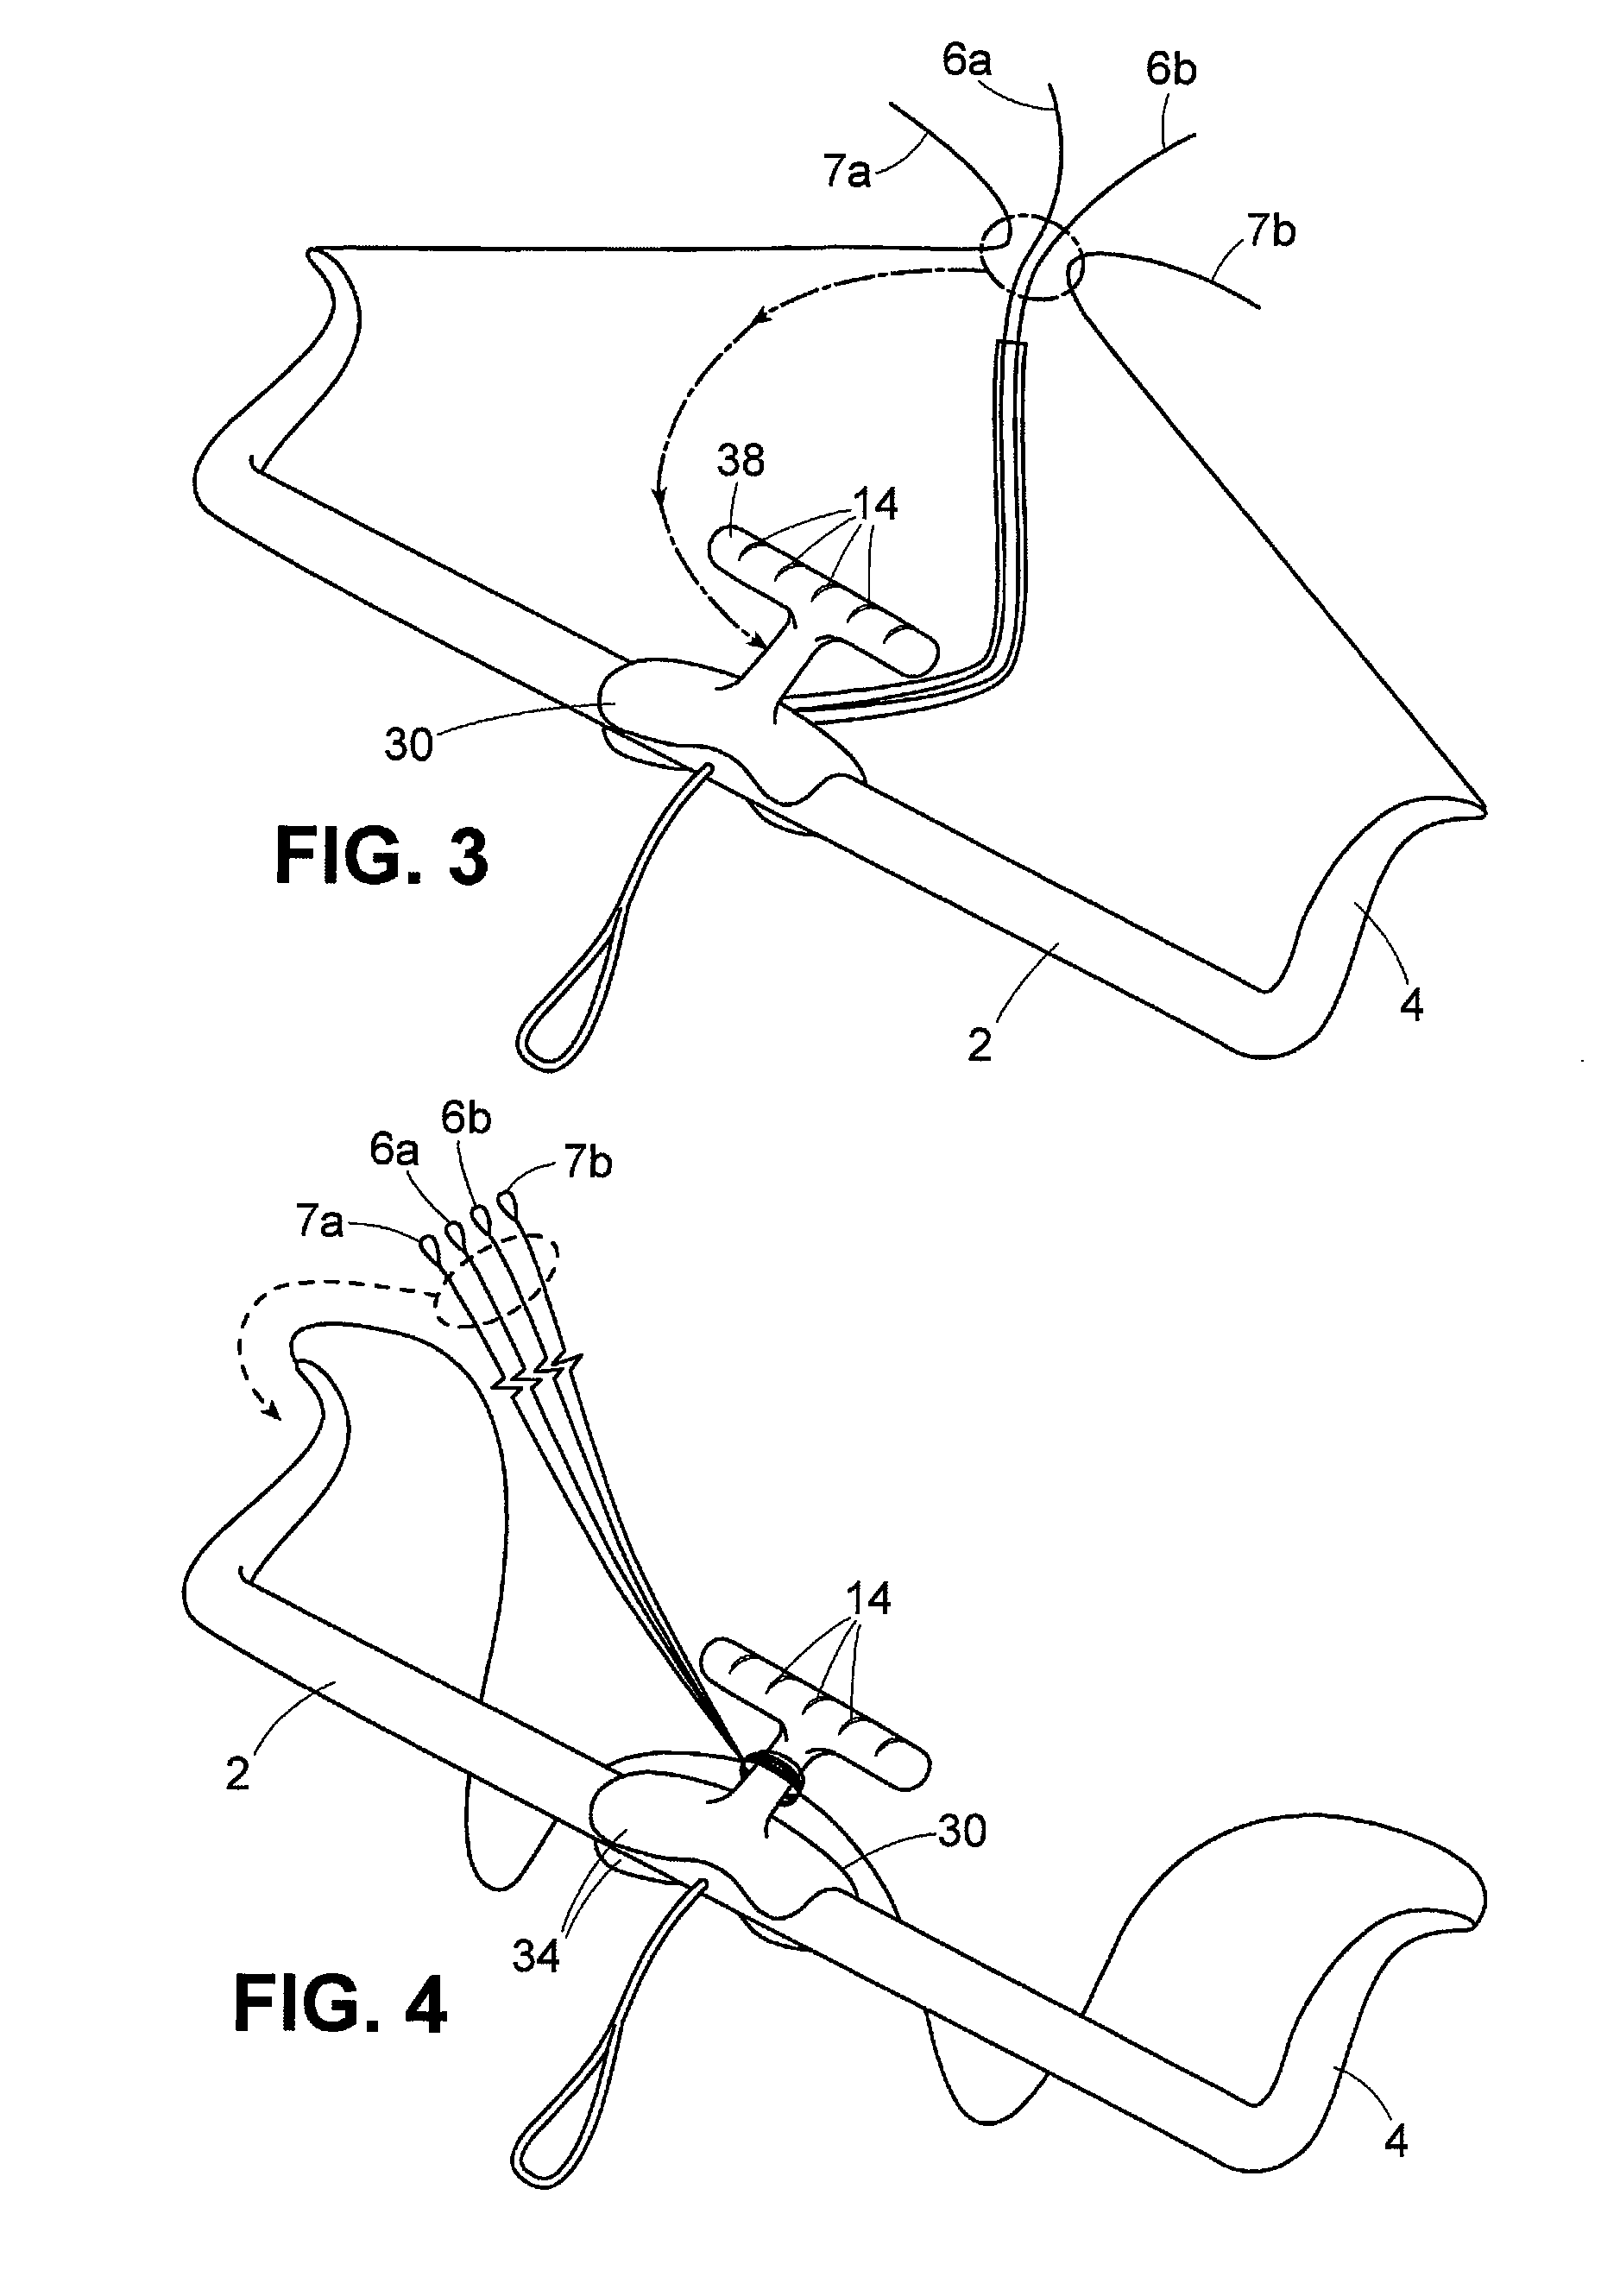 Detachable Line Management Device for Traction Kites